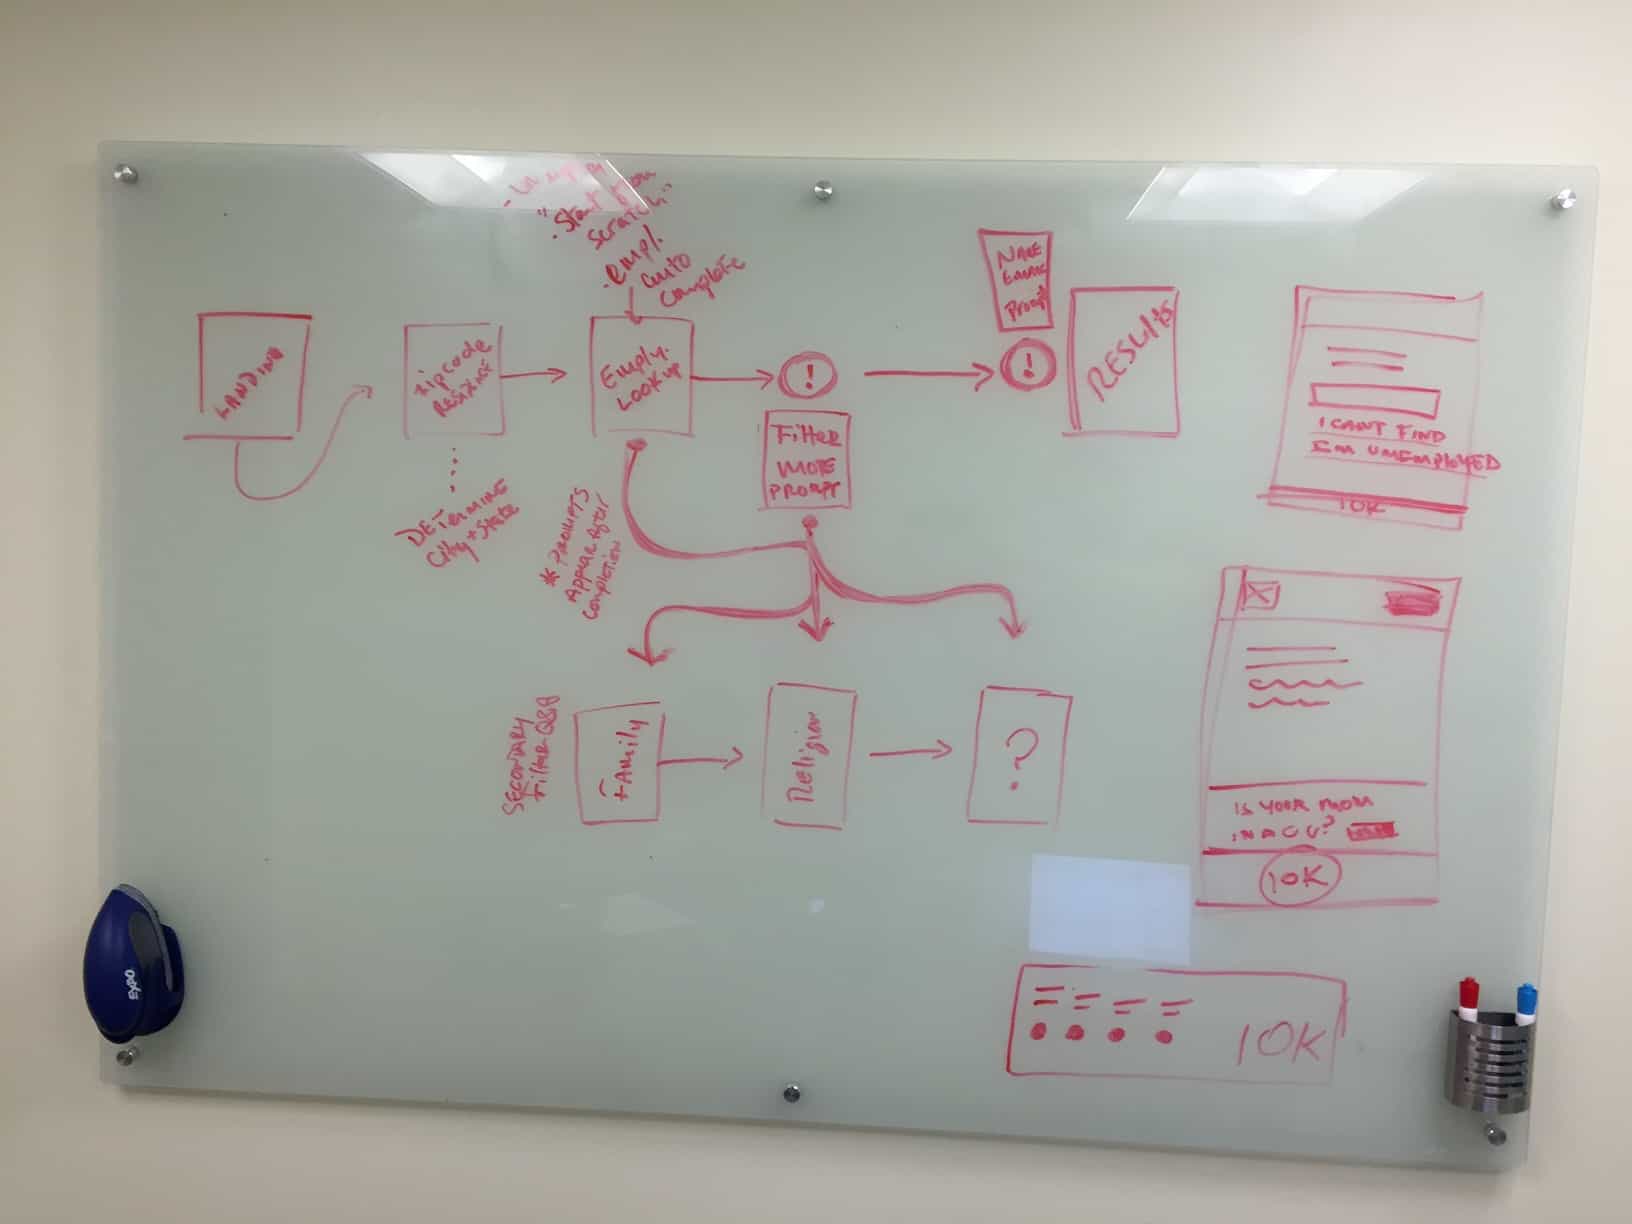 // Whiteboarding session of user flow (1 of 2)